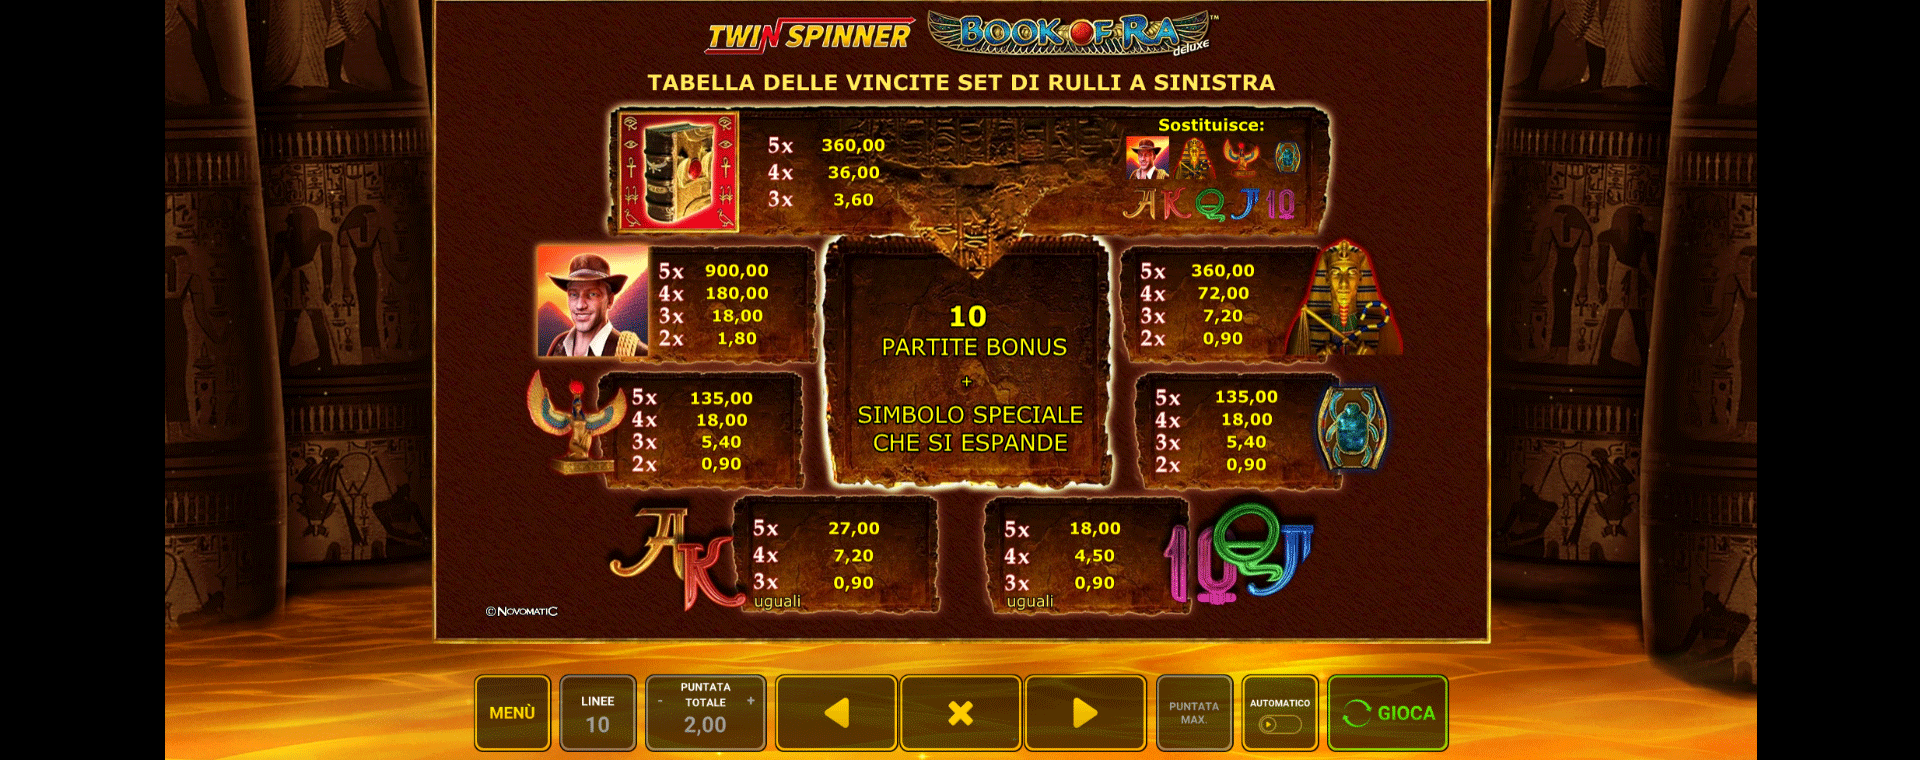 paytable slot machine book of ra twin spinner